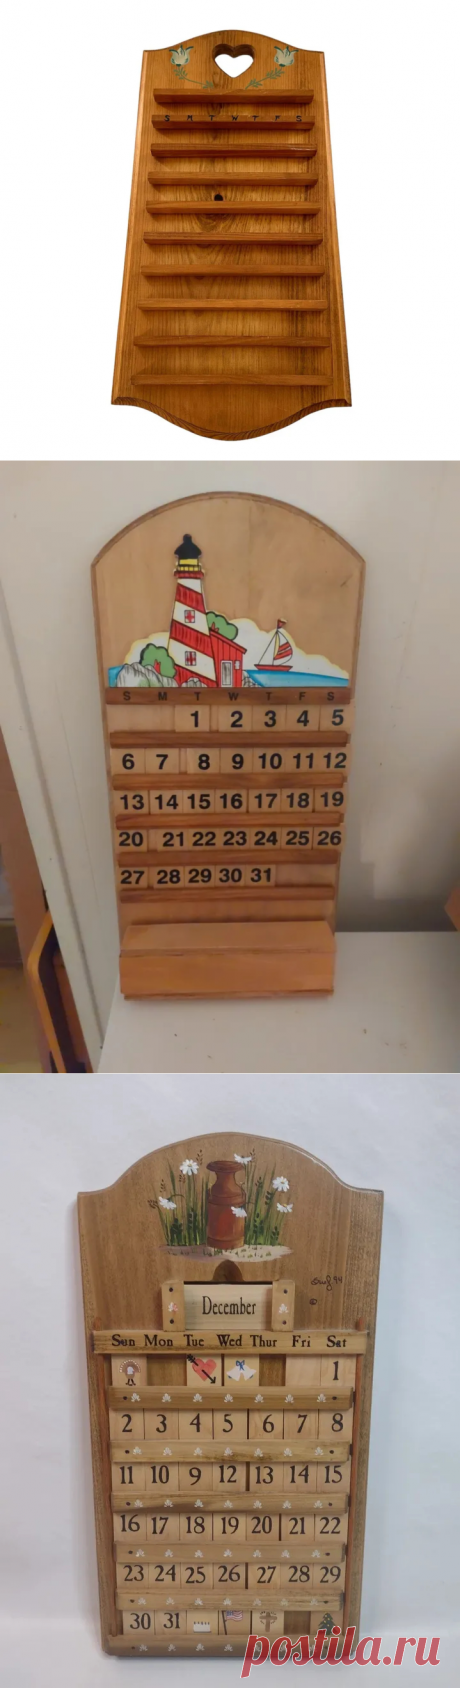 Collectible Perpetual Calendars for sale | eBay